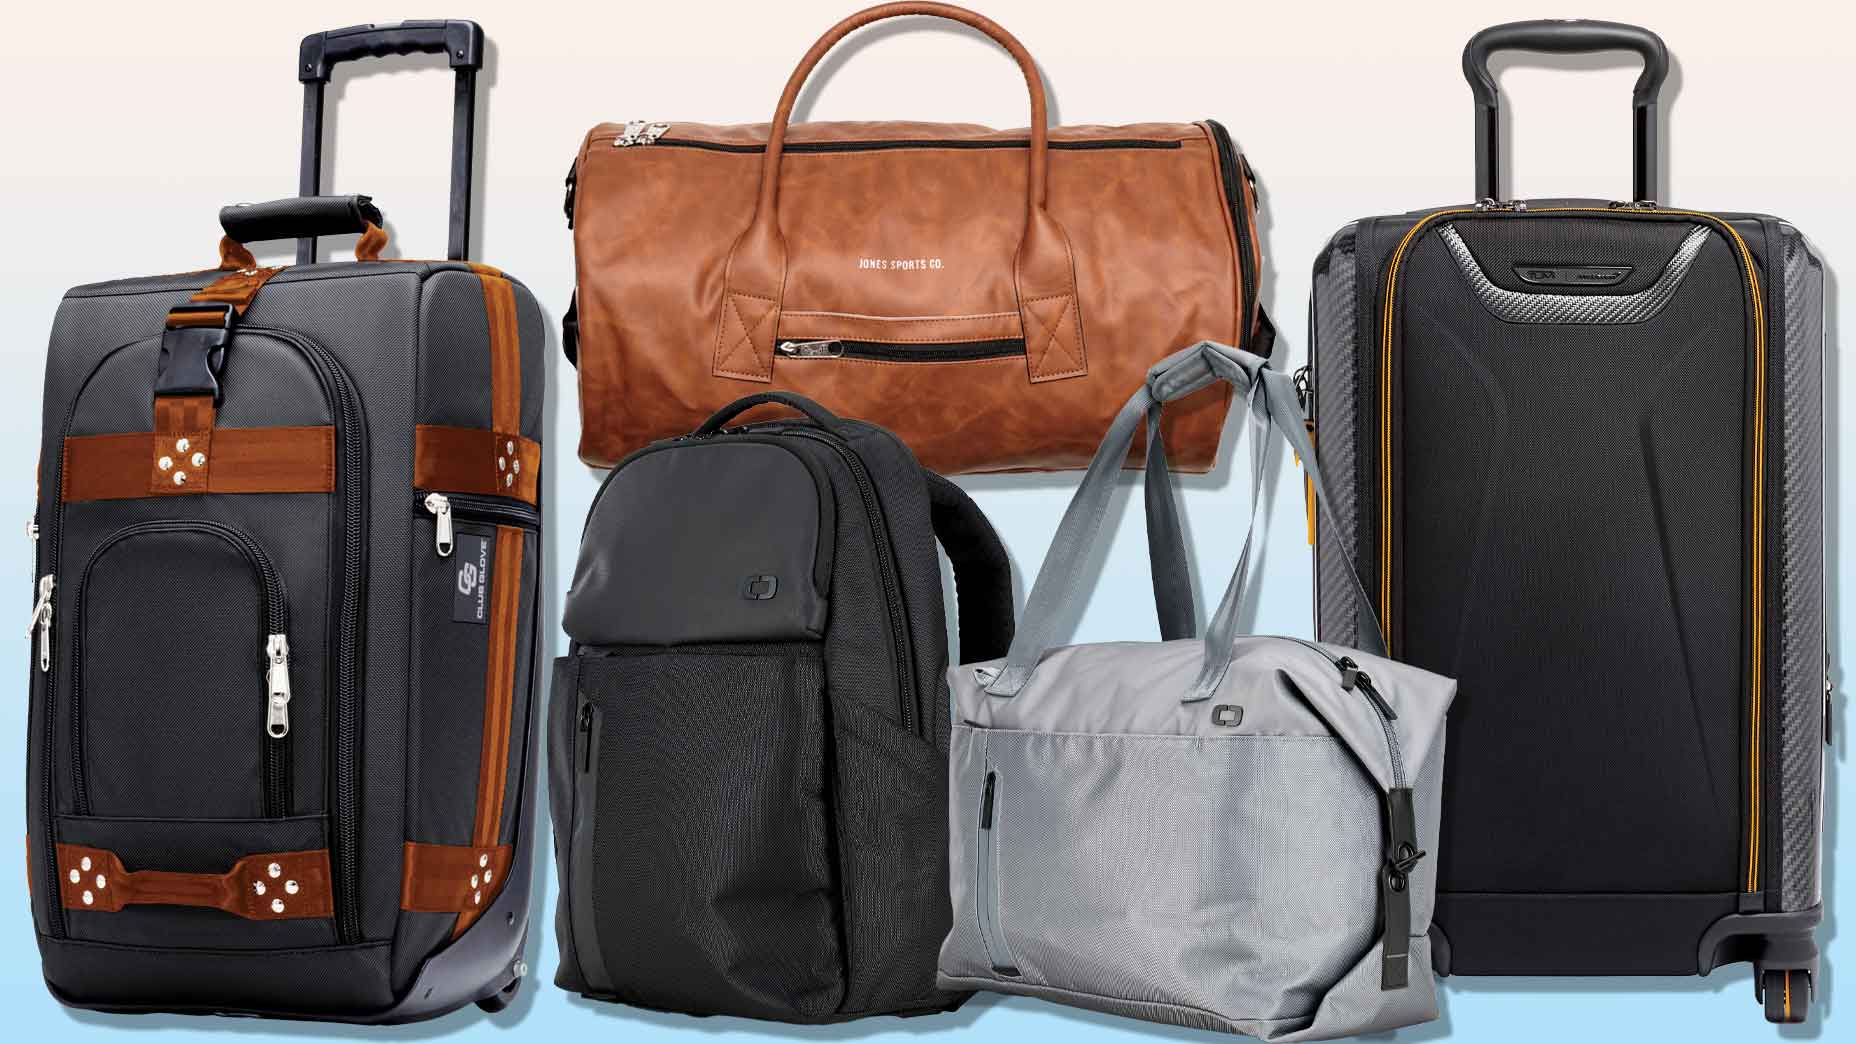 Shop this selection of stylish luggage to ensure an arrival that turns heads.